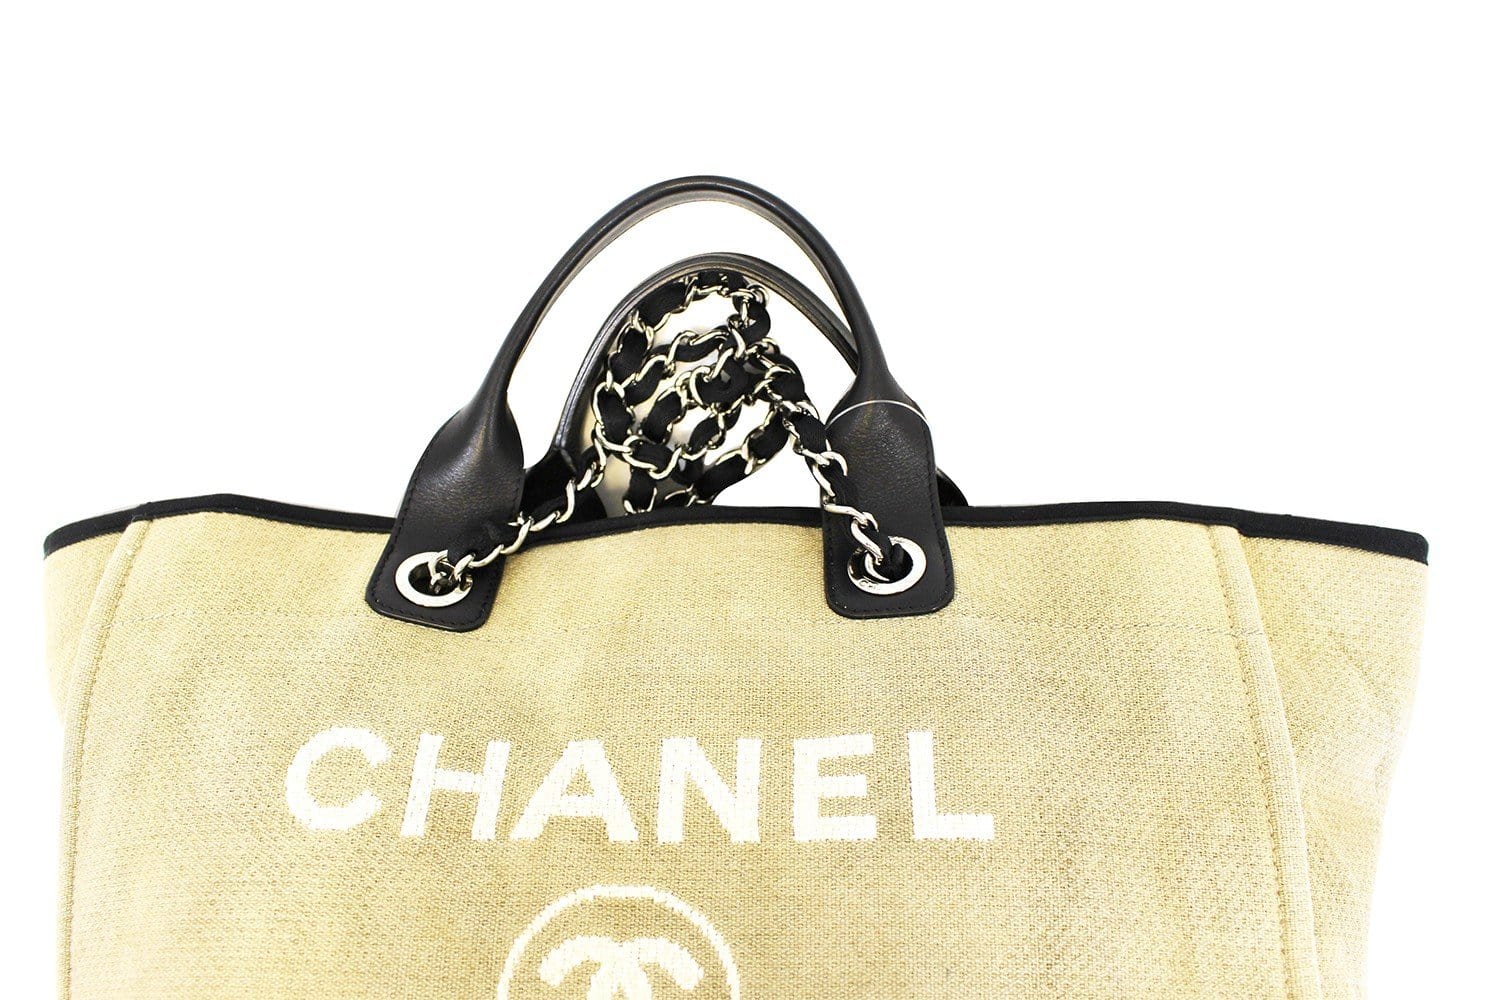 CHANEL Denim Large Shopping Tote Blue 1247576